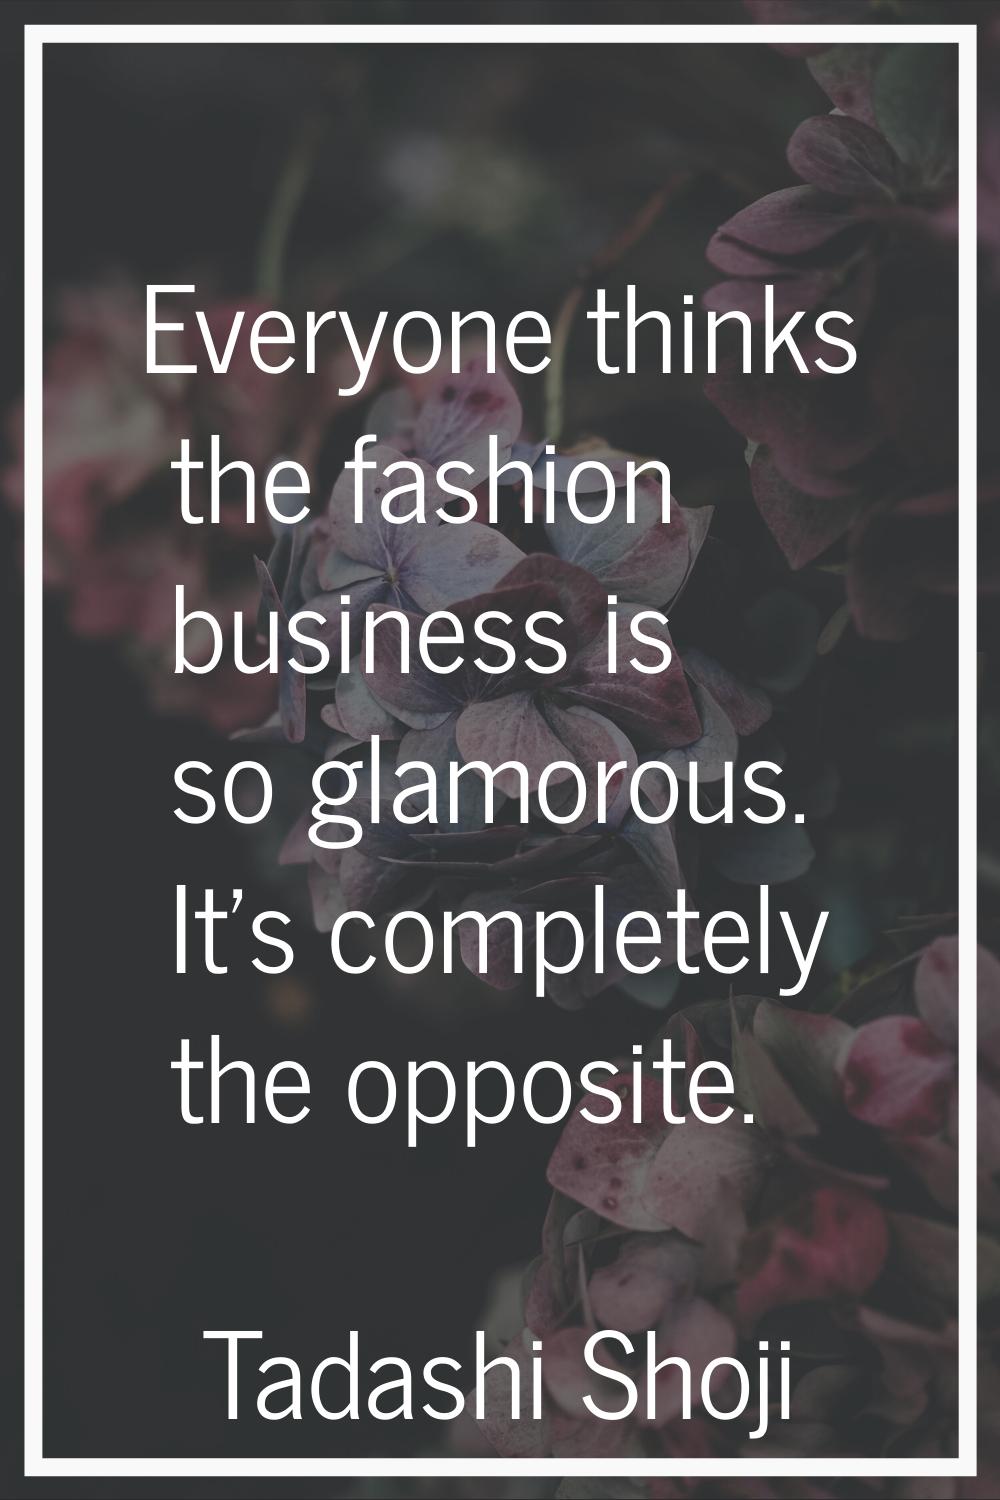 Everyone thinks the fashion business is so glamorous. It's completely the opposite.